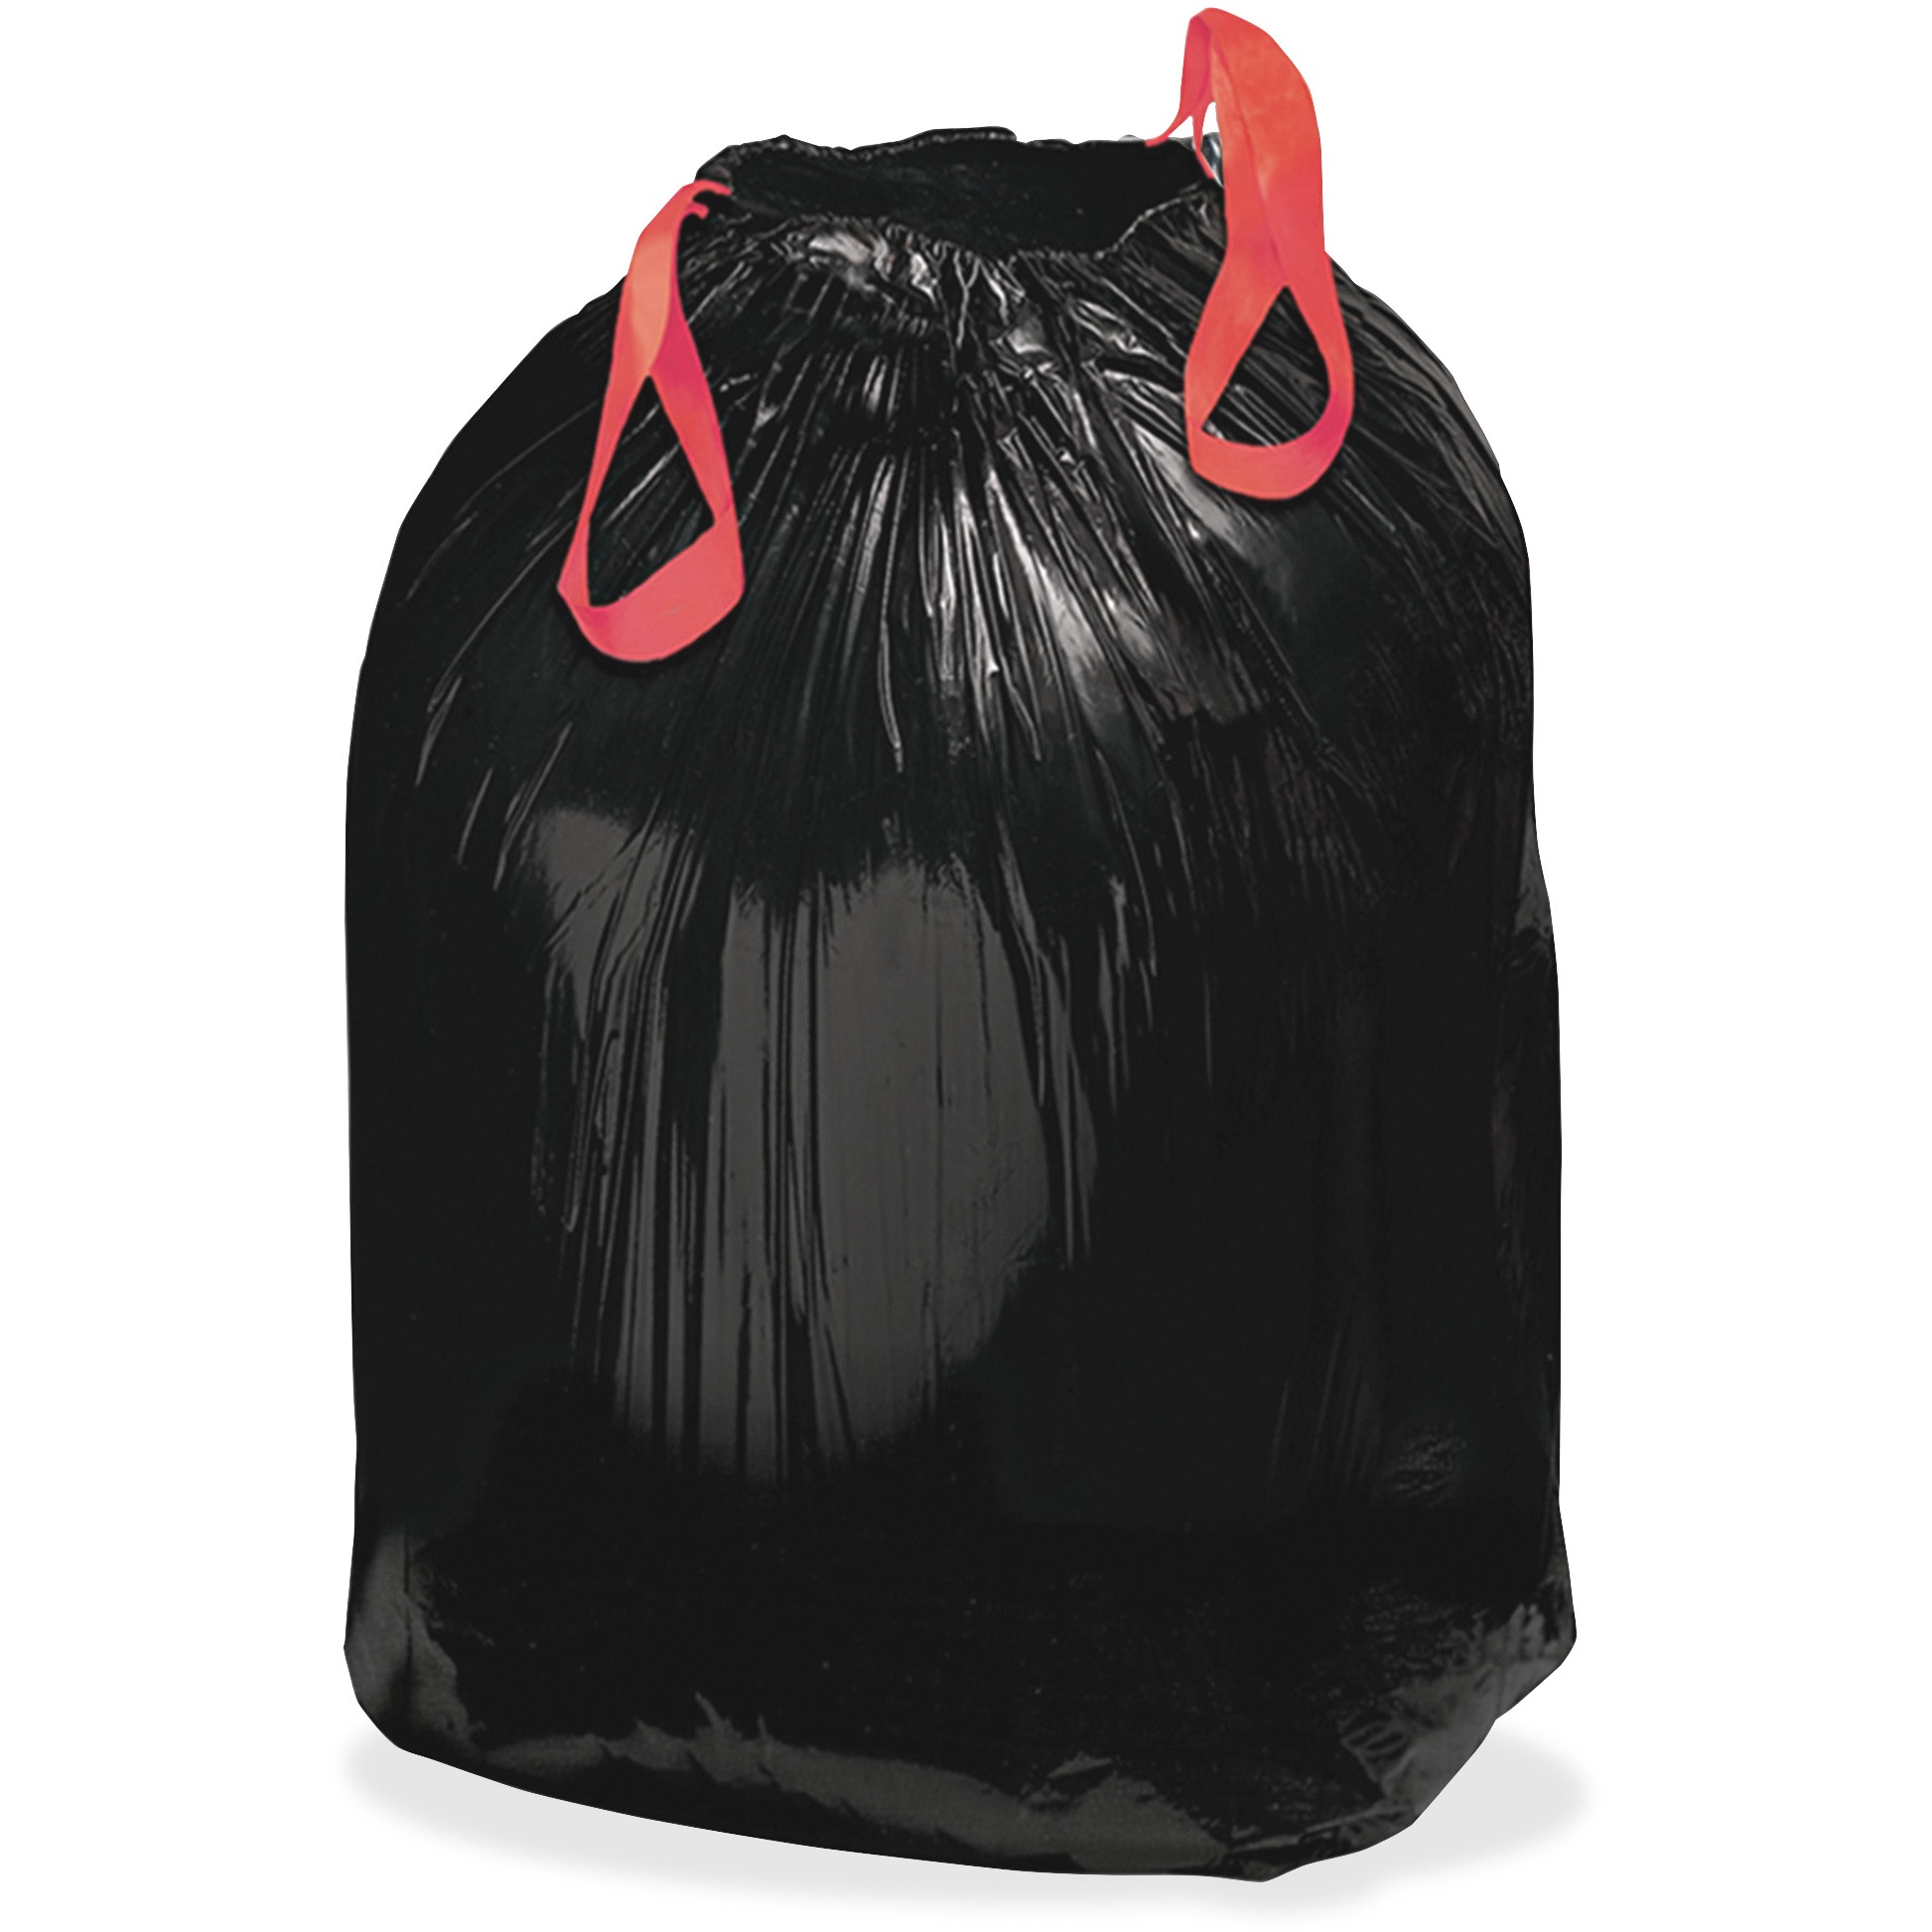 Webster Drawstring Trash Liners - Medium Size - 33 gal Capacity - 33.50" Width x 38" Length - 1.20 mil (30 Micron) Thickness - B